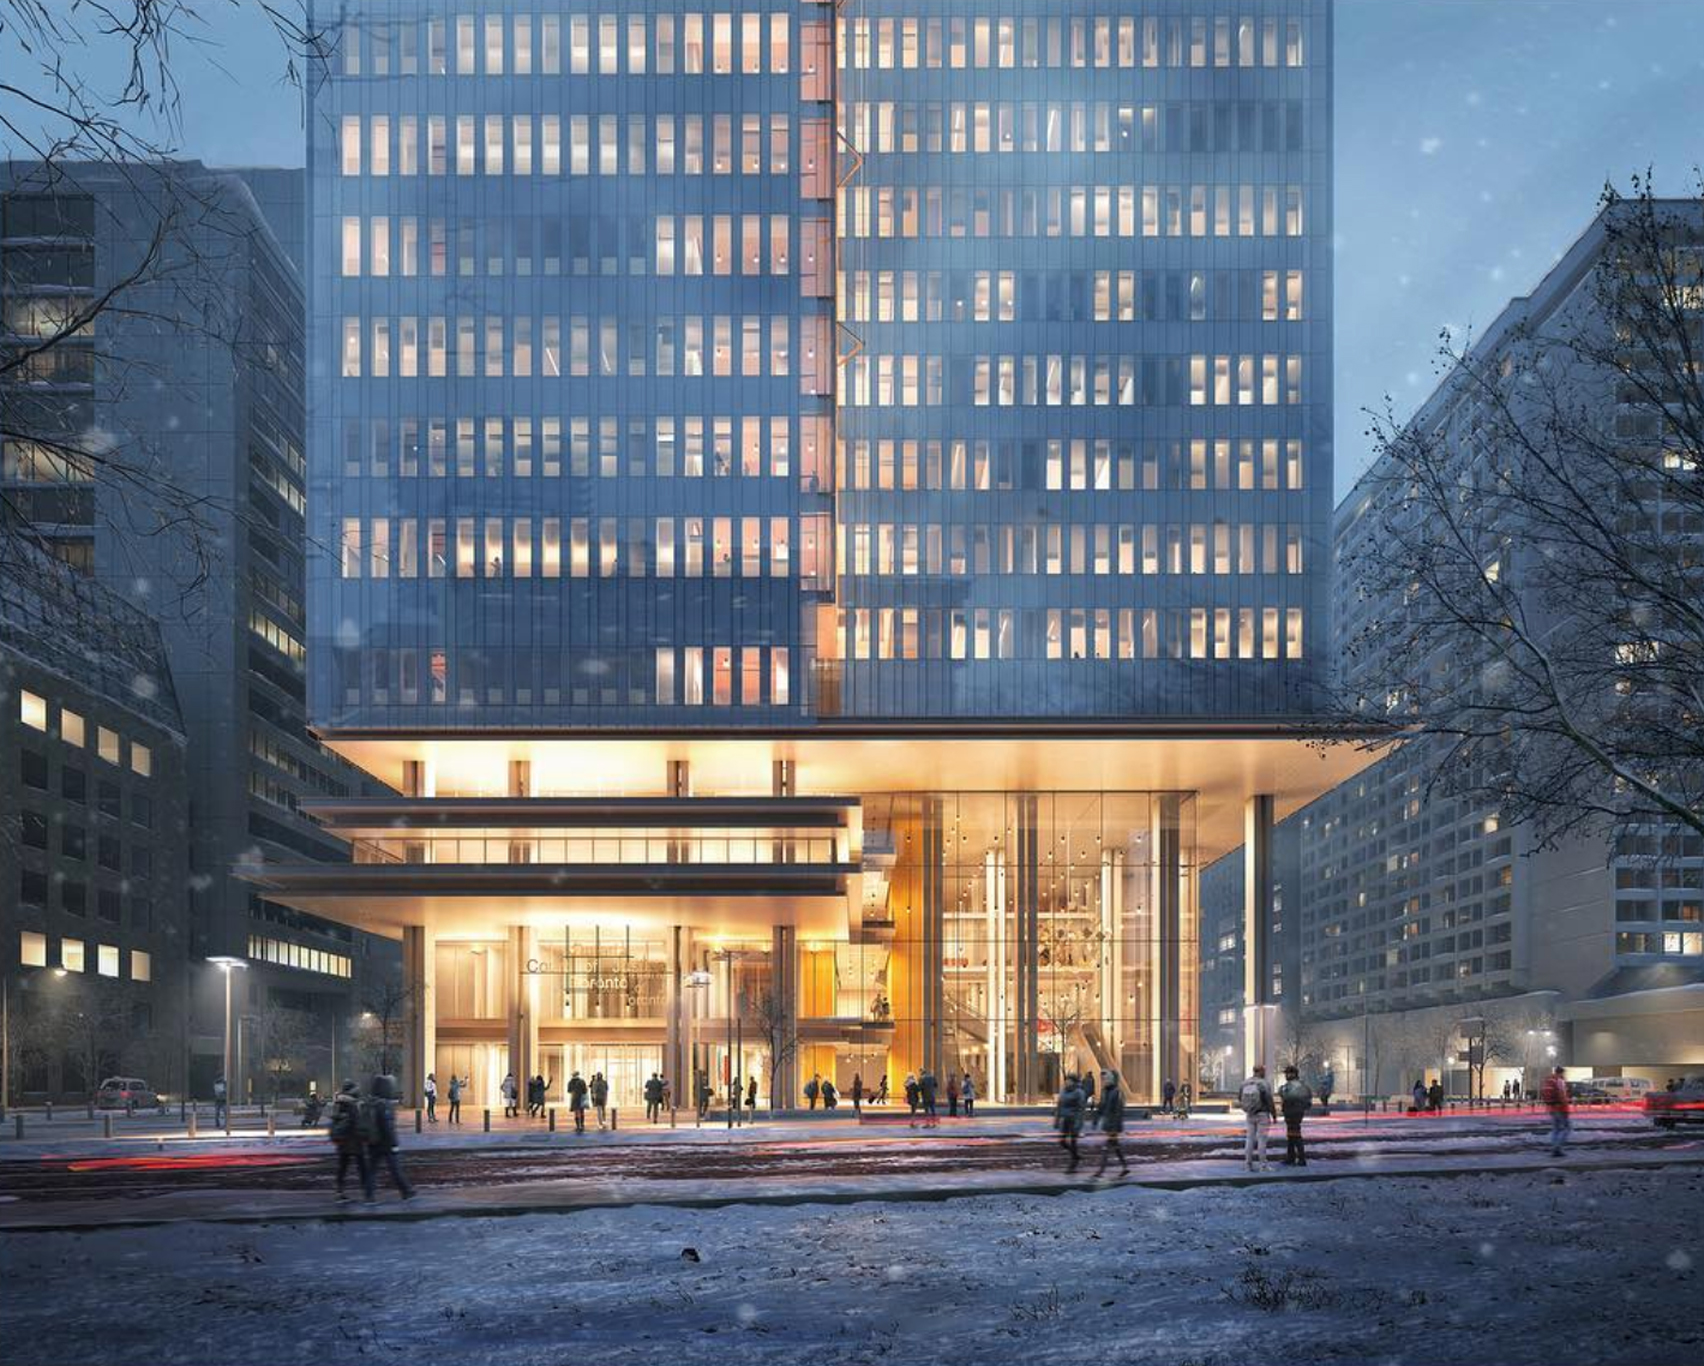 Renzo Piano unveils new courthouse for Toronto as first Canadian project-5